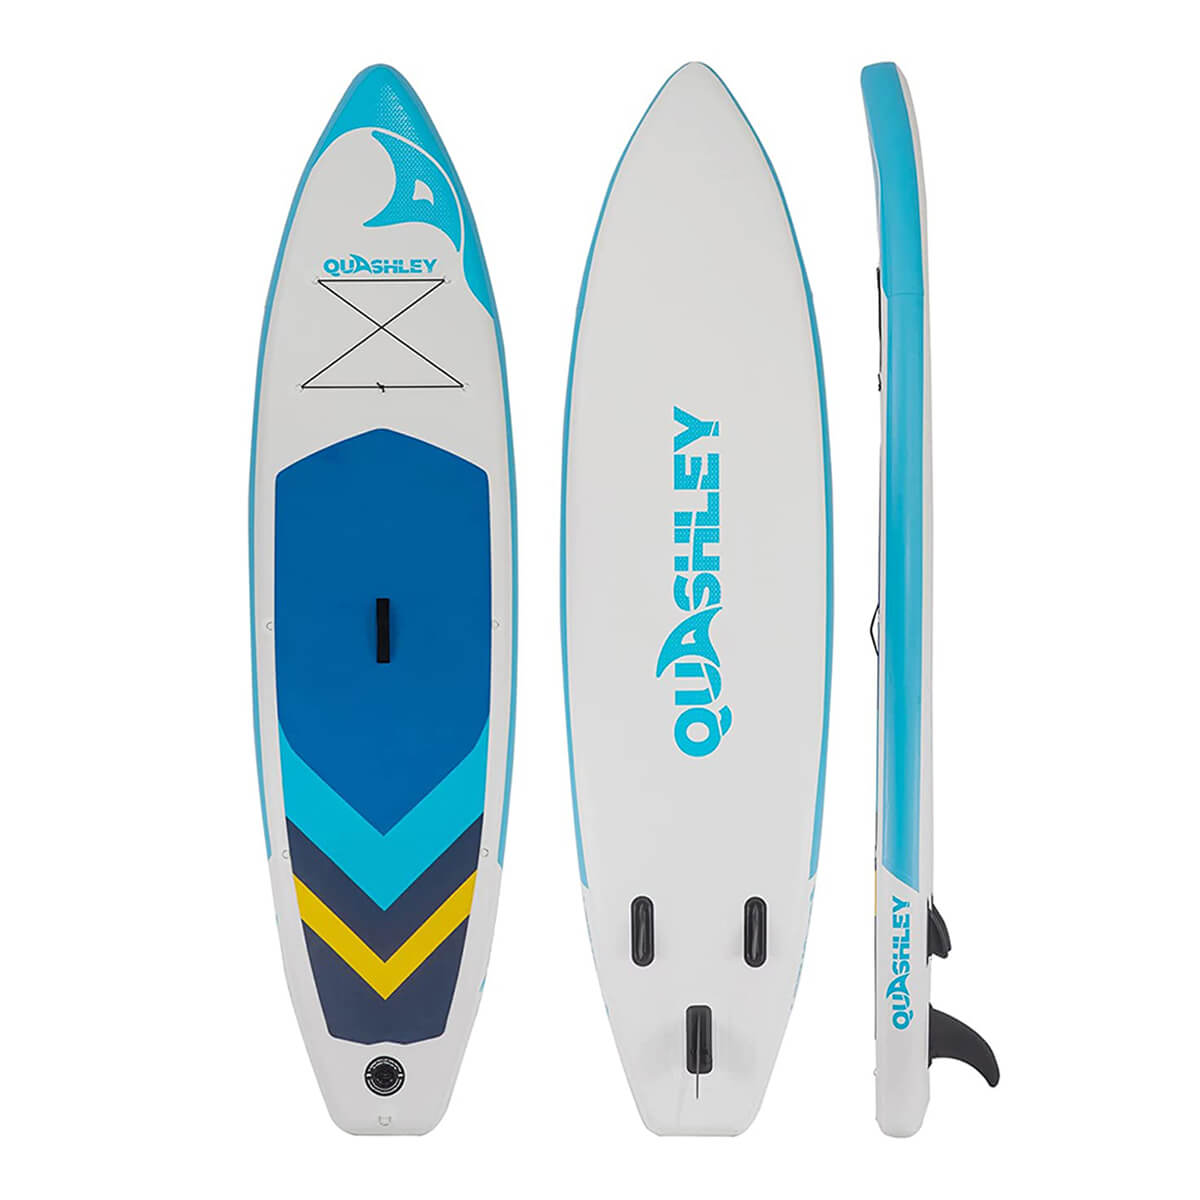 Quashley Inflatable Stand Up Board Accessories Paddle with SUP Surfboard Premium